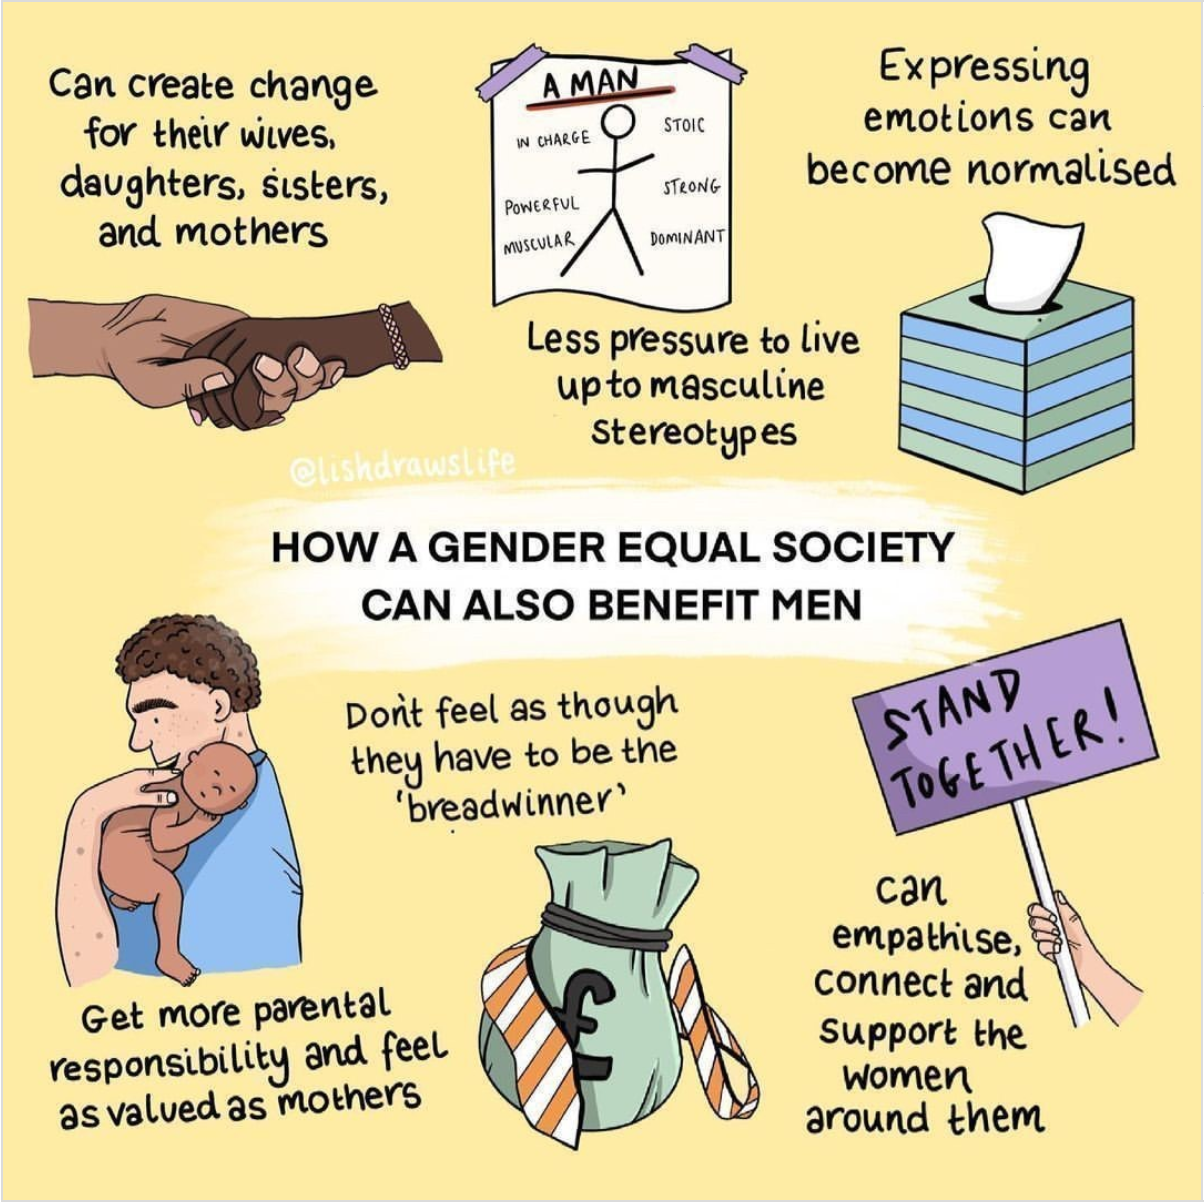 UN Women, How a gender equal society can benefit men